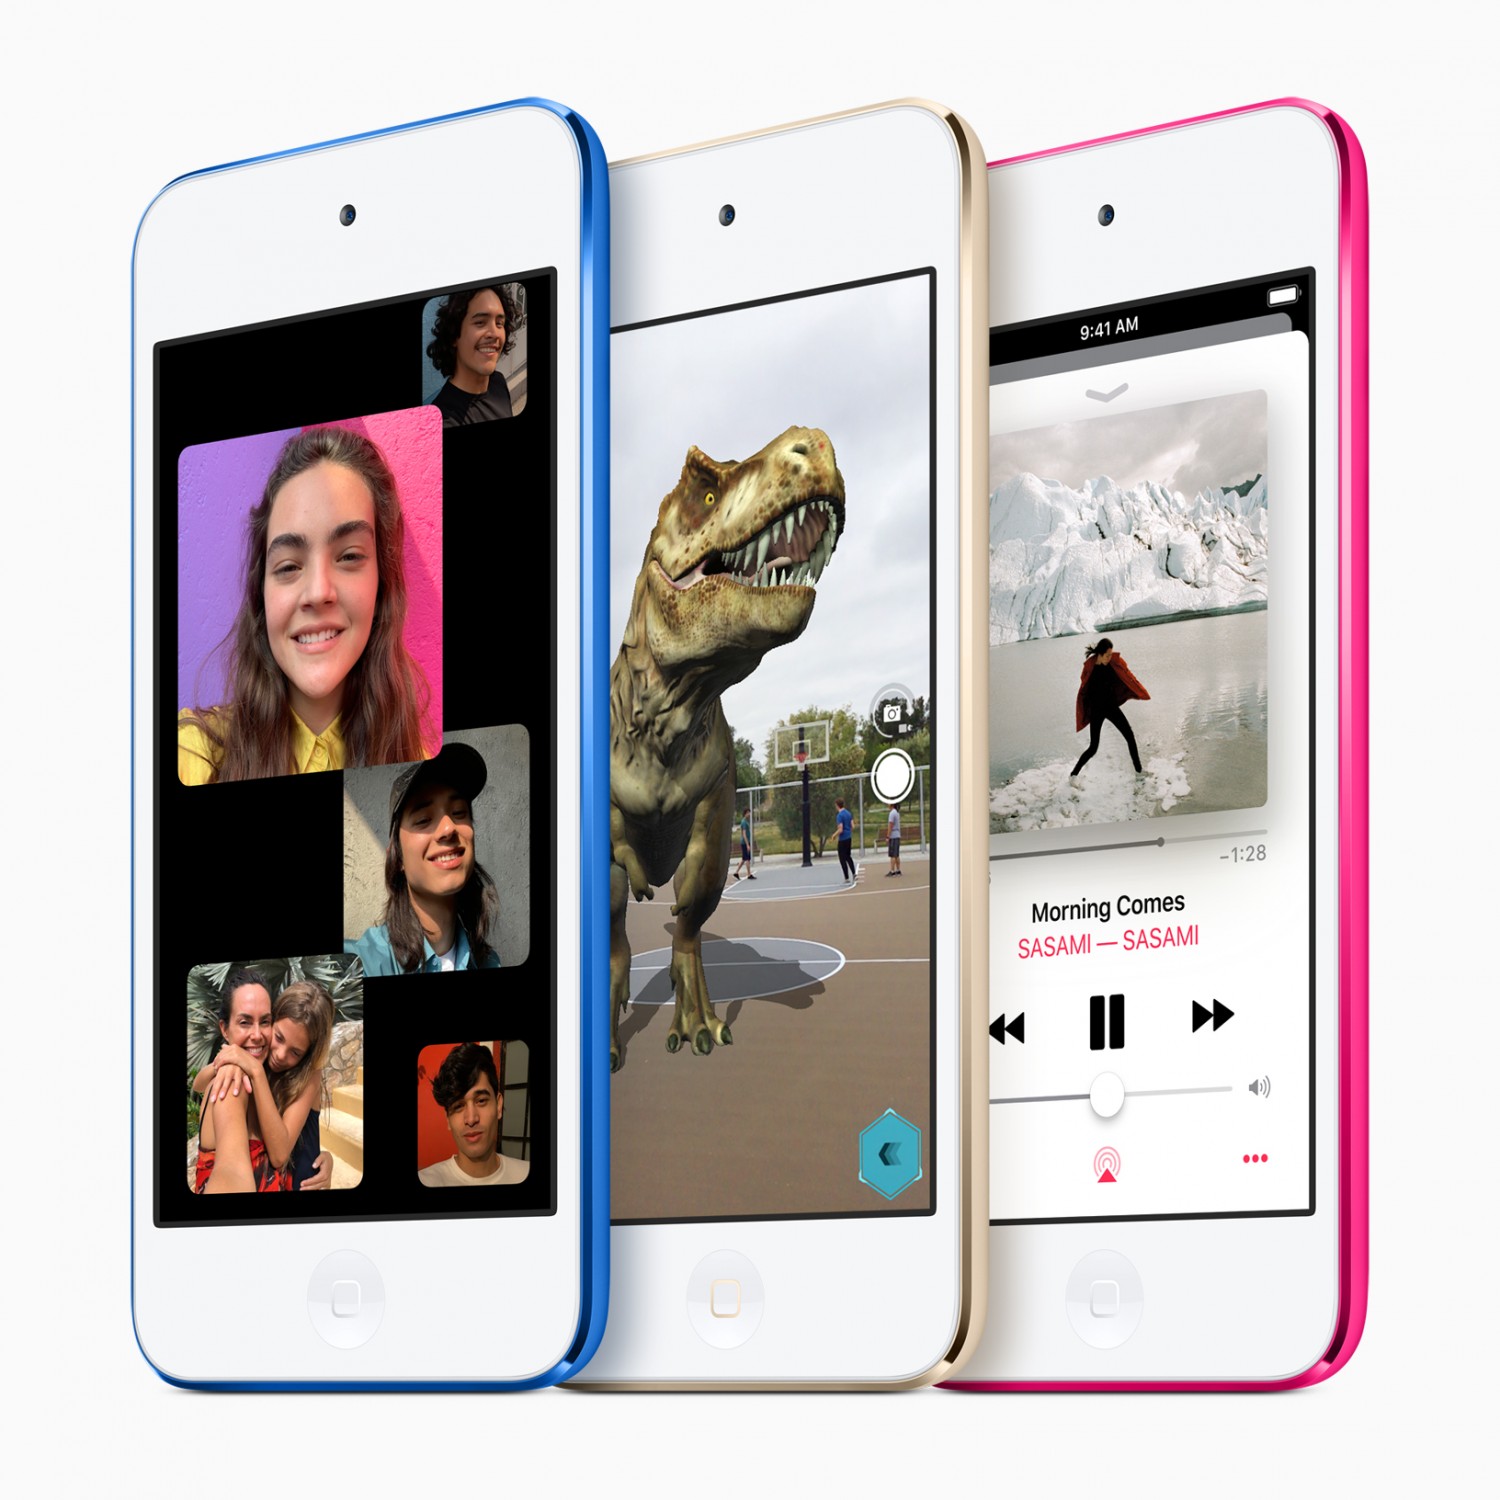 The new iPod touch features Group FaceTime and AR experiences, a first for iPod.